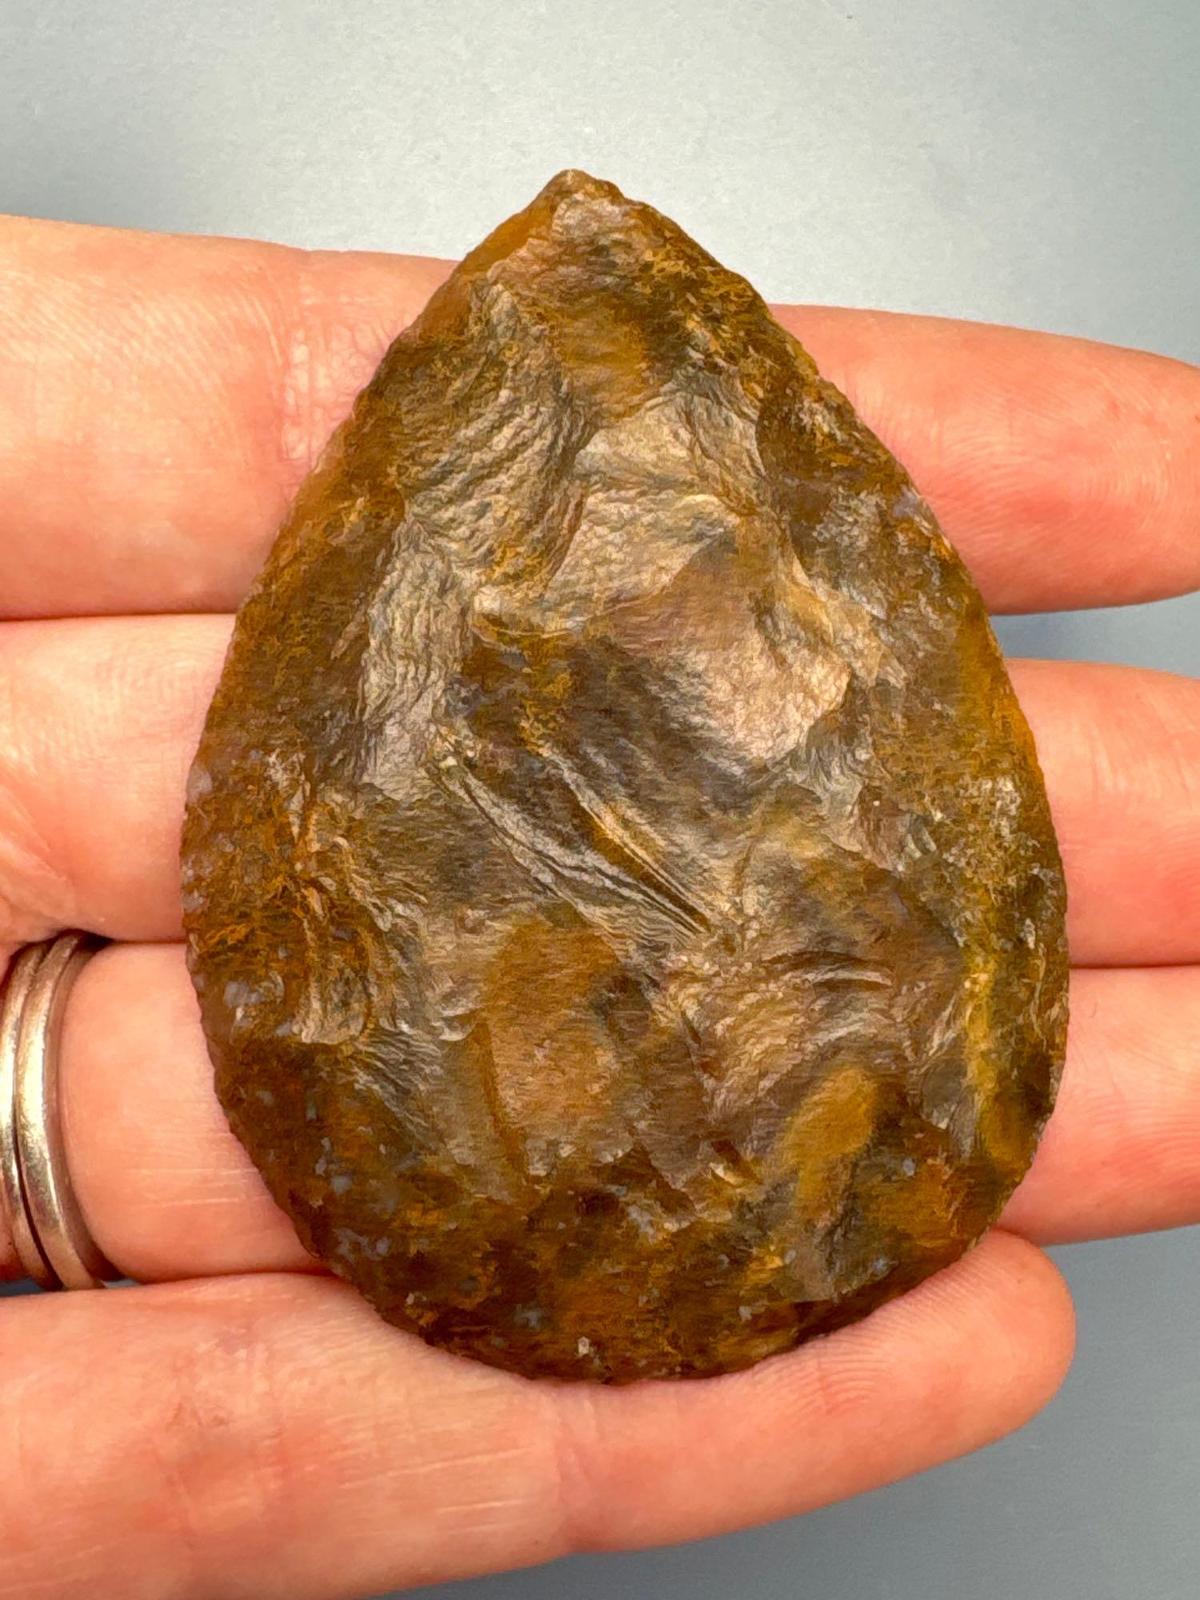 FINE 2 1/4" Agate Jasper Blade, Found in the Western US, Fantastic Example, Well-Flaked, Ex: Podpora